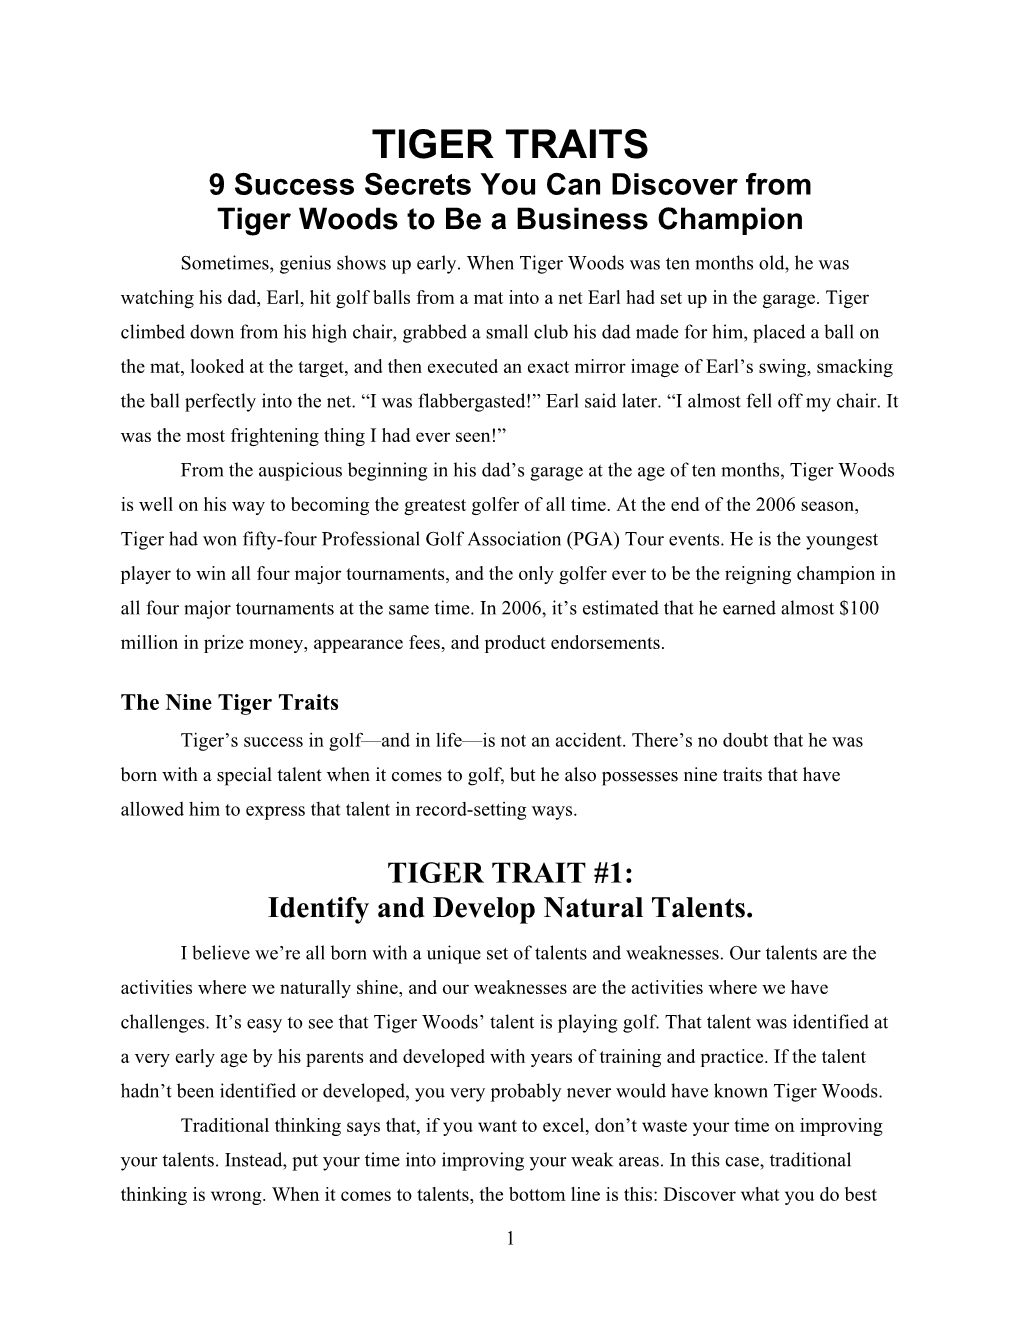 TIGER TRAITS 9 Success Secrets You Can Discover from Tiger Woods to Be a Business Champion